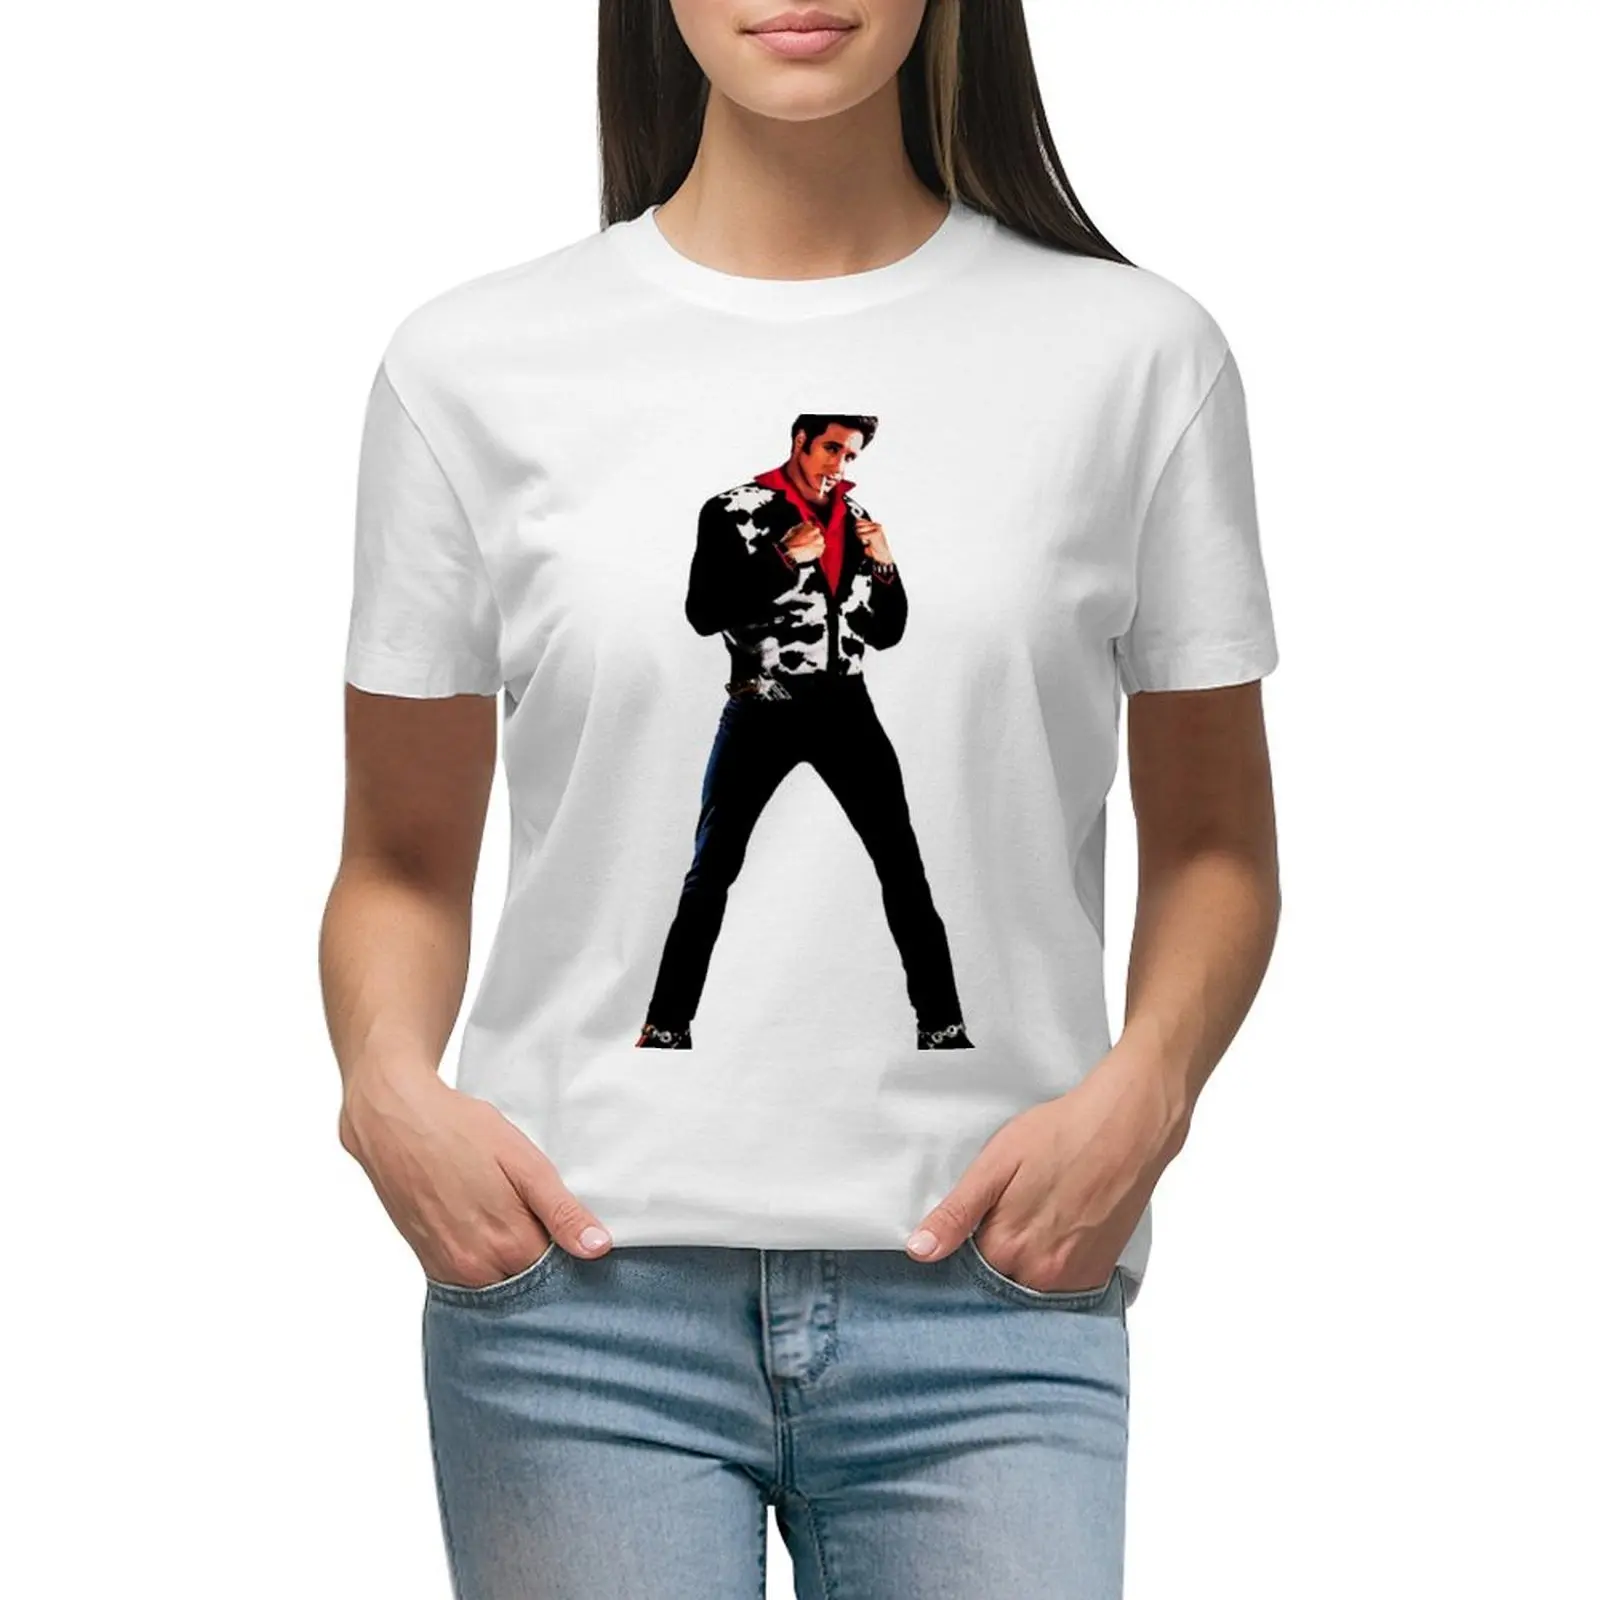 

Andrew Dice Clay T-shirt shirts graphic tees Short sleeve tee kawaii clothes plus size t shirts for Women loose fit